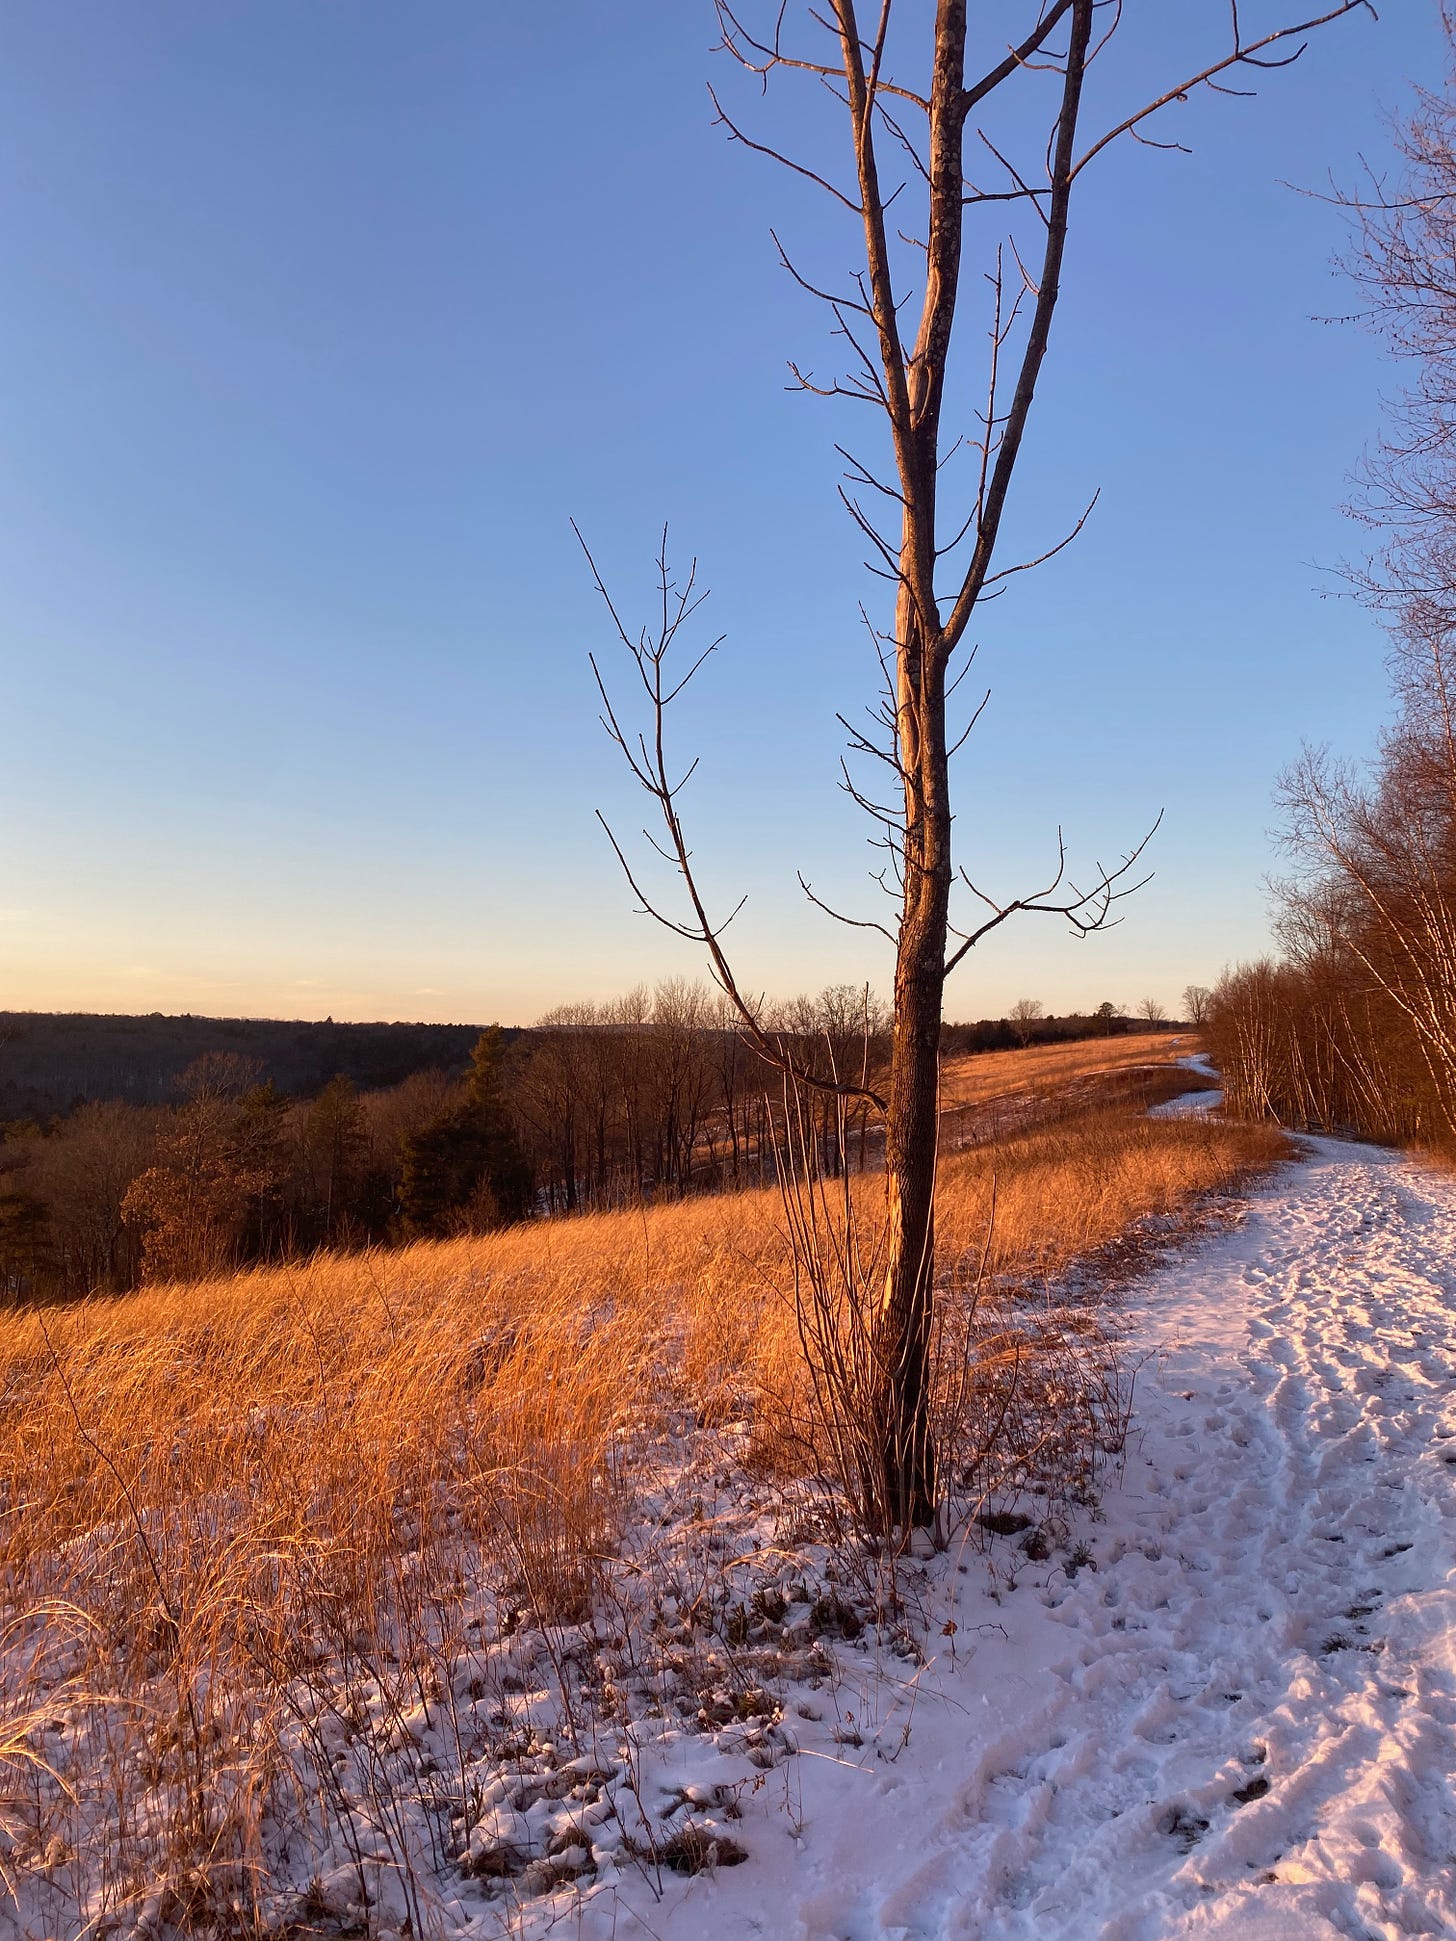 A snow-covered path on a hilltop at sunset. The grass-covered hill is bathed in golden light, the sky is a deep, sharp blue, and there is one bare tree in the foreground.